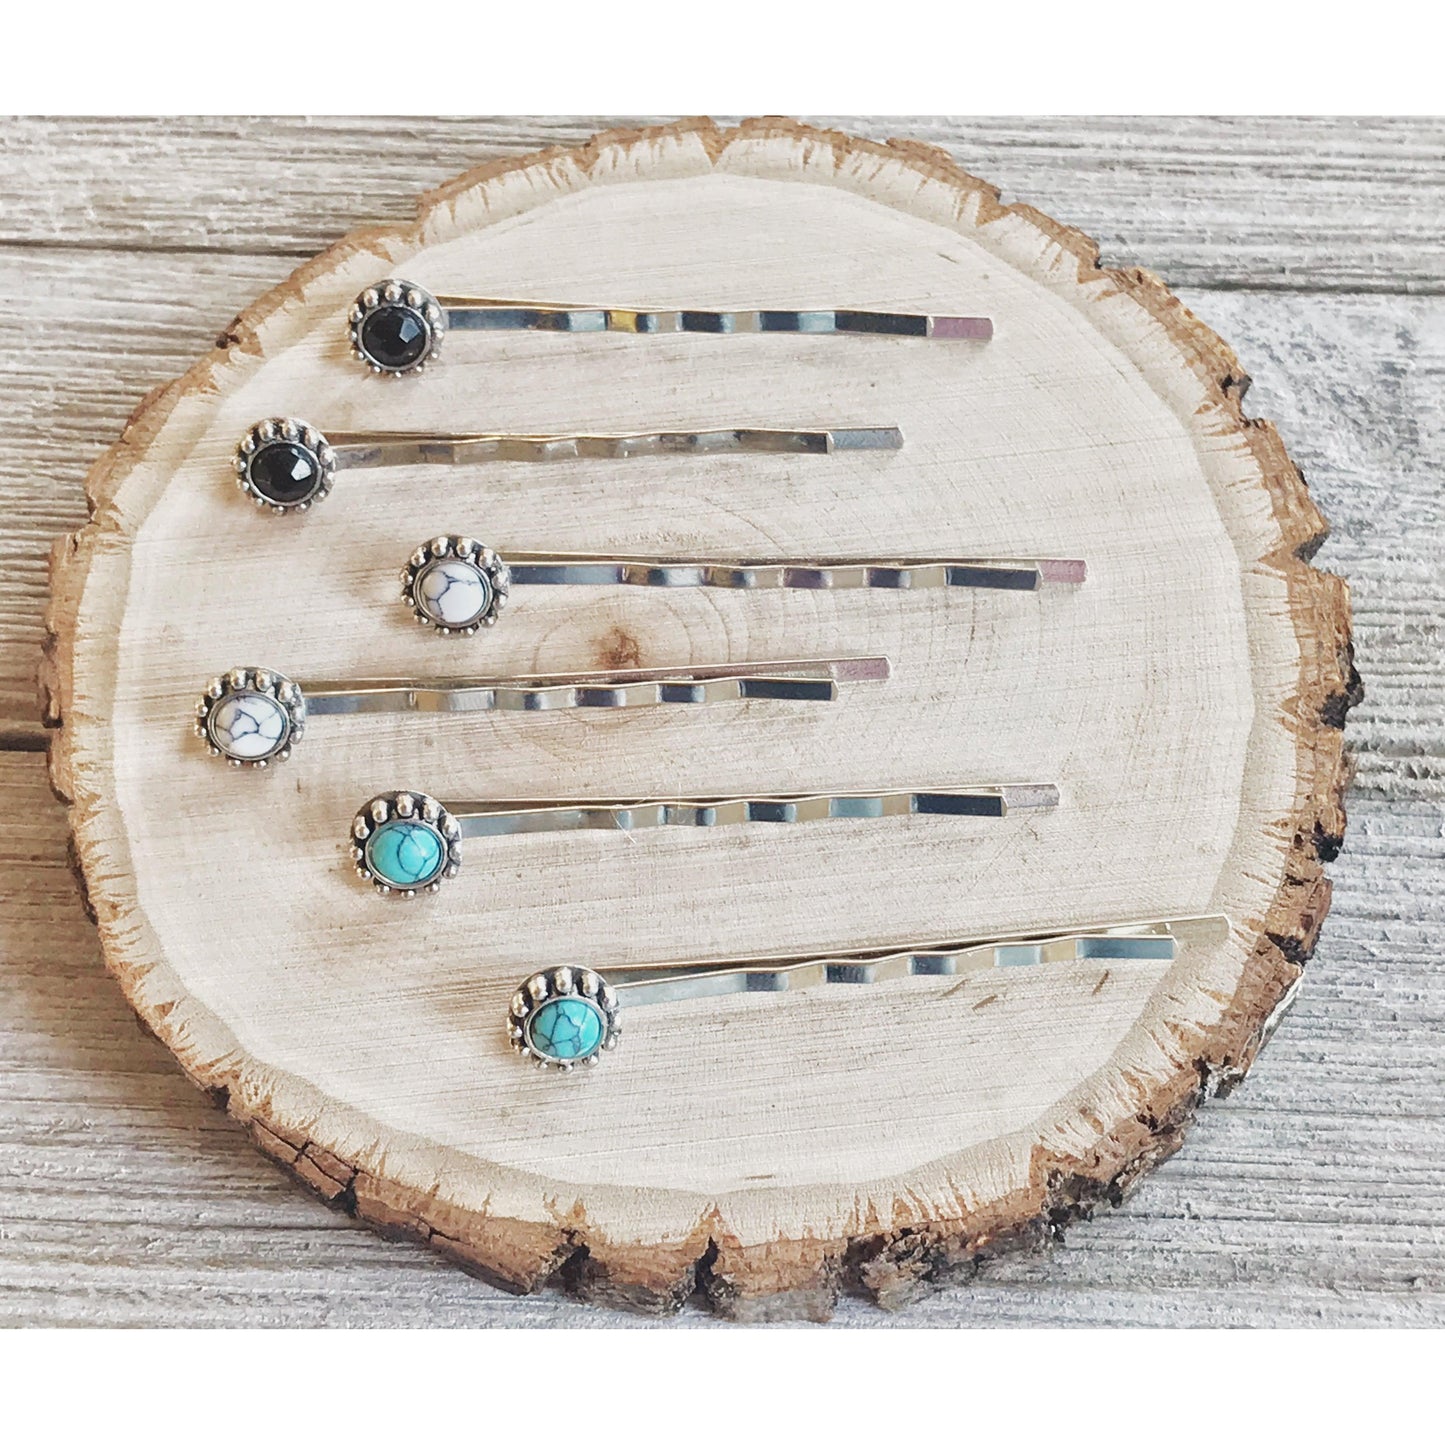 Black, White & Turquoise Stone Hair Pins - Set of 6 Western Cowgirl Bobby Pins, Women's Southwestern Boho Hair Accessories